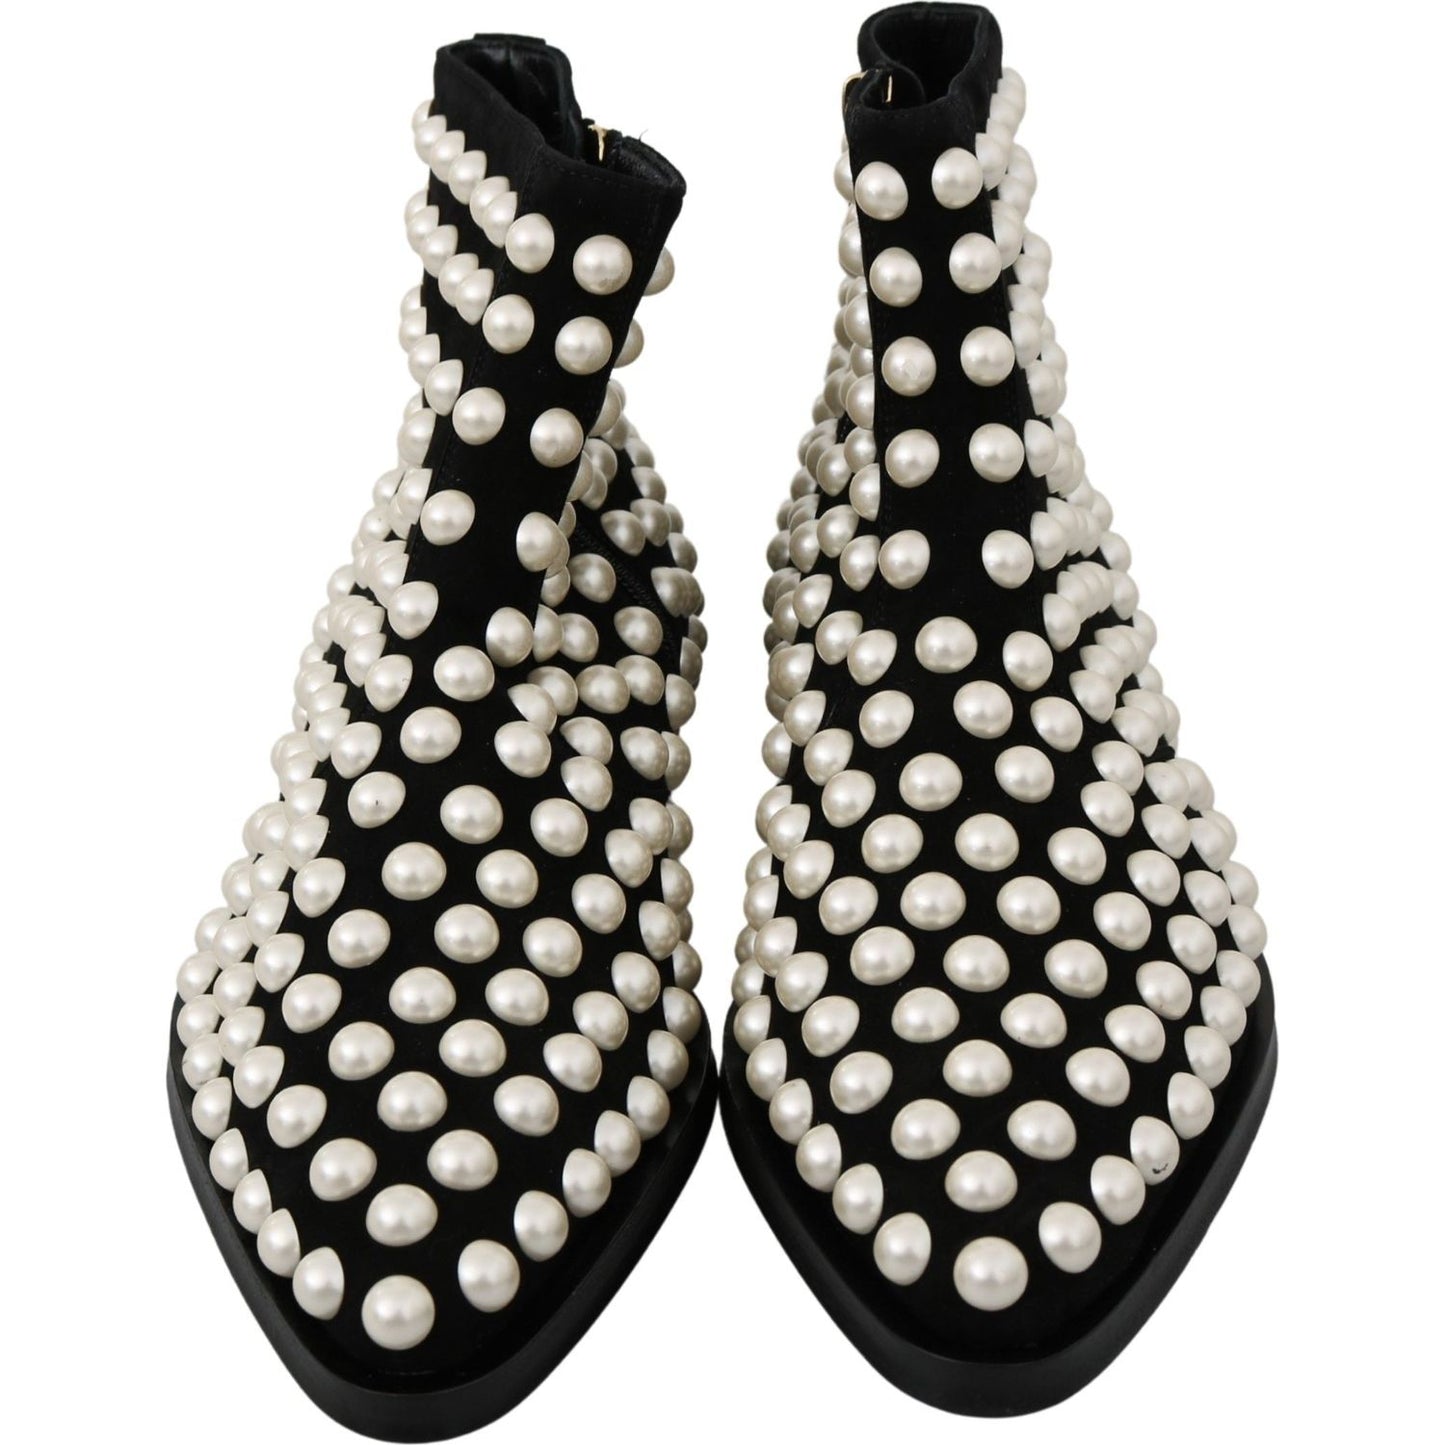 Dolce & Gabbana Chic Black Suede Ankle Boots with Pearls black-suede-pearl-studs-boots-shoes